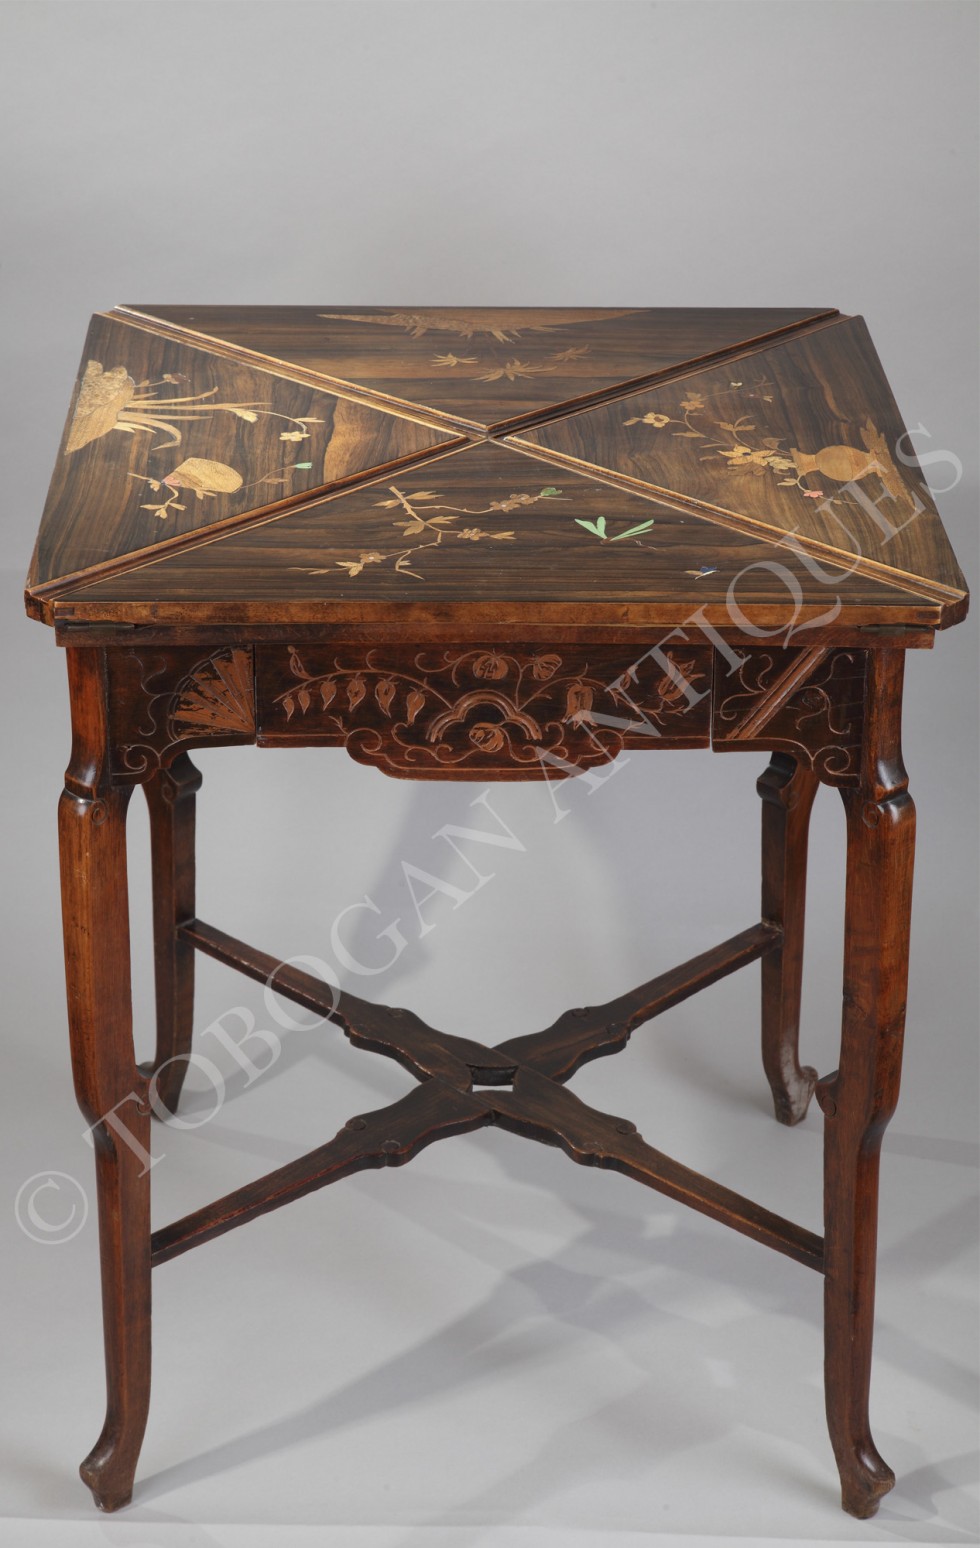 C. Balny <br/> Japanese Style Game Table